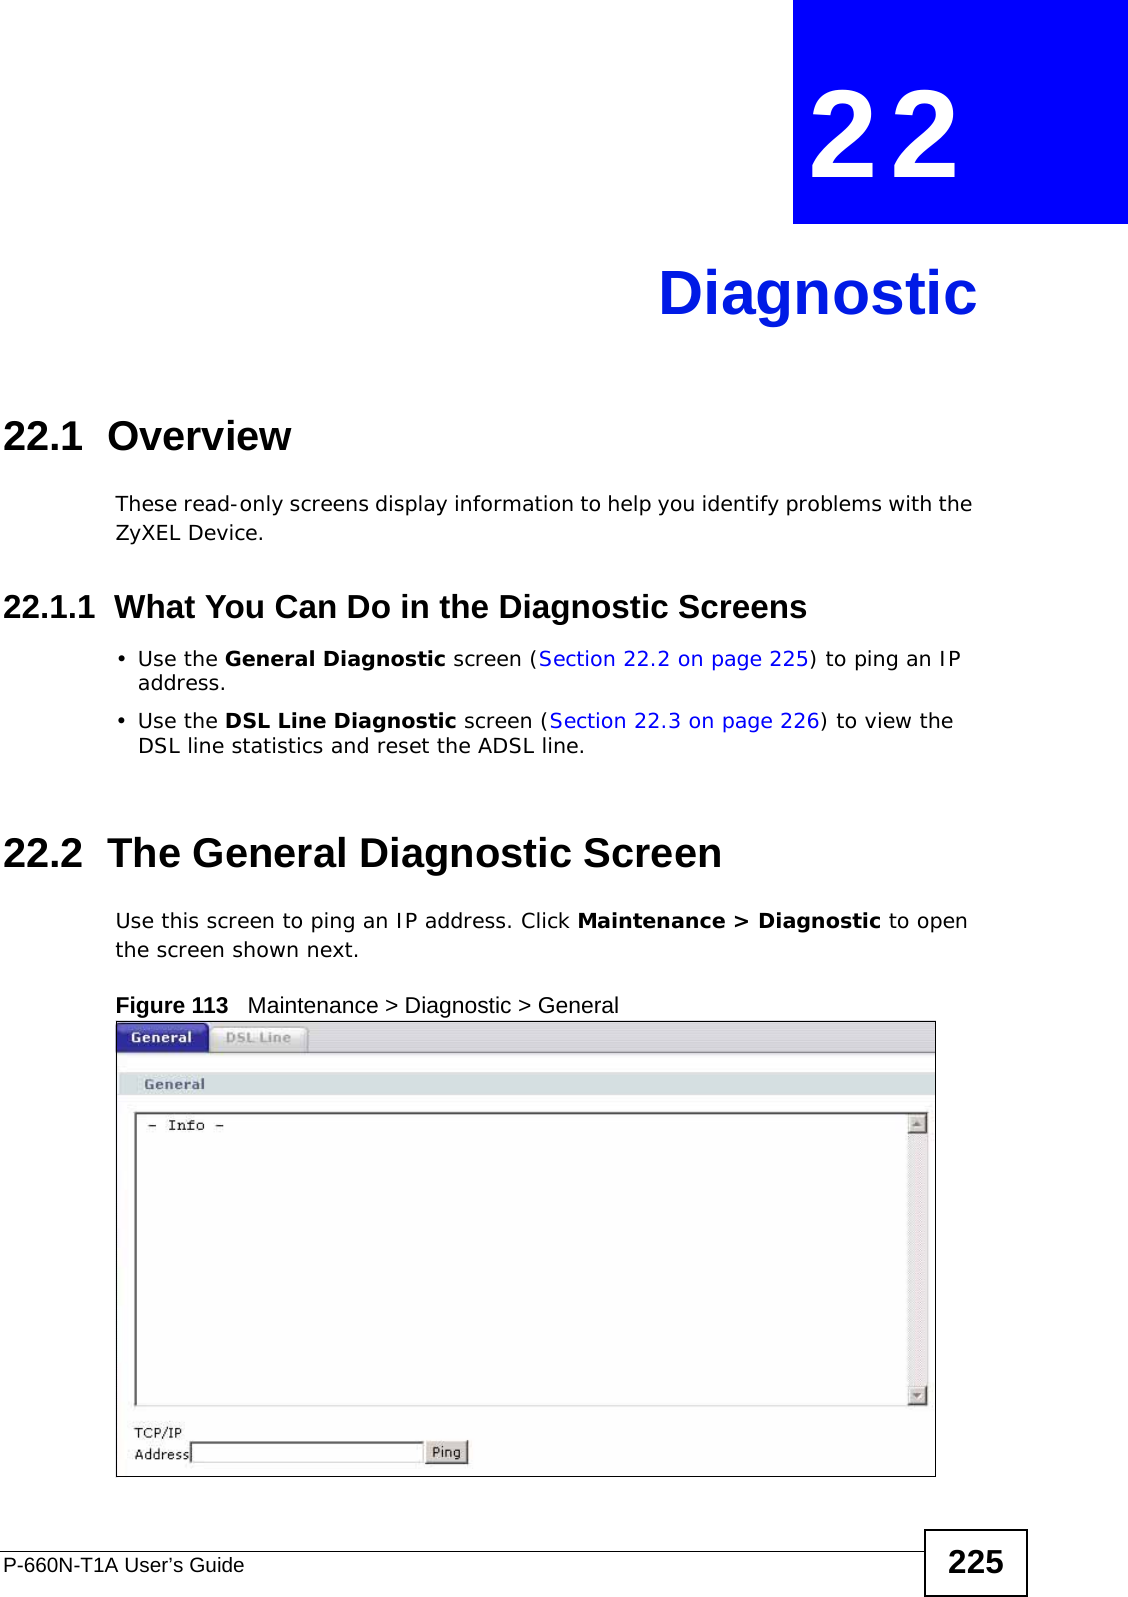 P-660N-T1A User’s Guide 225CHAPTER  22 Diagnostic22.1  OverviewThese read-only screens display information to help you identify problems with the ZyXEL Device.22.1.1  What You Can Do in the Diagnostic Screens•Use the General Diagnostic screen (Section 22.2 on page 225) to ping an IP address.•Use the DSL Line Diagnostic screen (Section 22.3 on page 226) to view the DSL line statistics and reset the ADSL line.22.2  The General Diagnostic Screen Use this screen to ping an IP address. Click Maintenance &gt; Diagnostic to open the screen shown next.Figure 113   Maintenance &gt; Diagnostic &gt; General